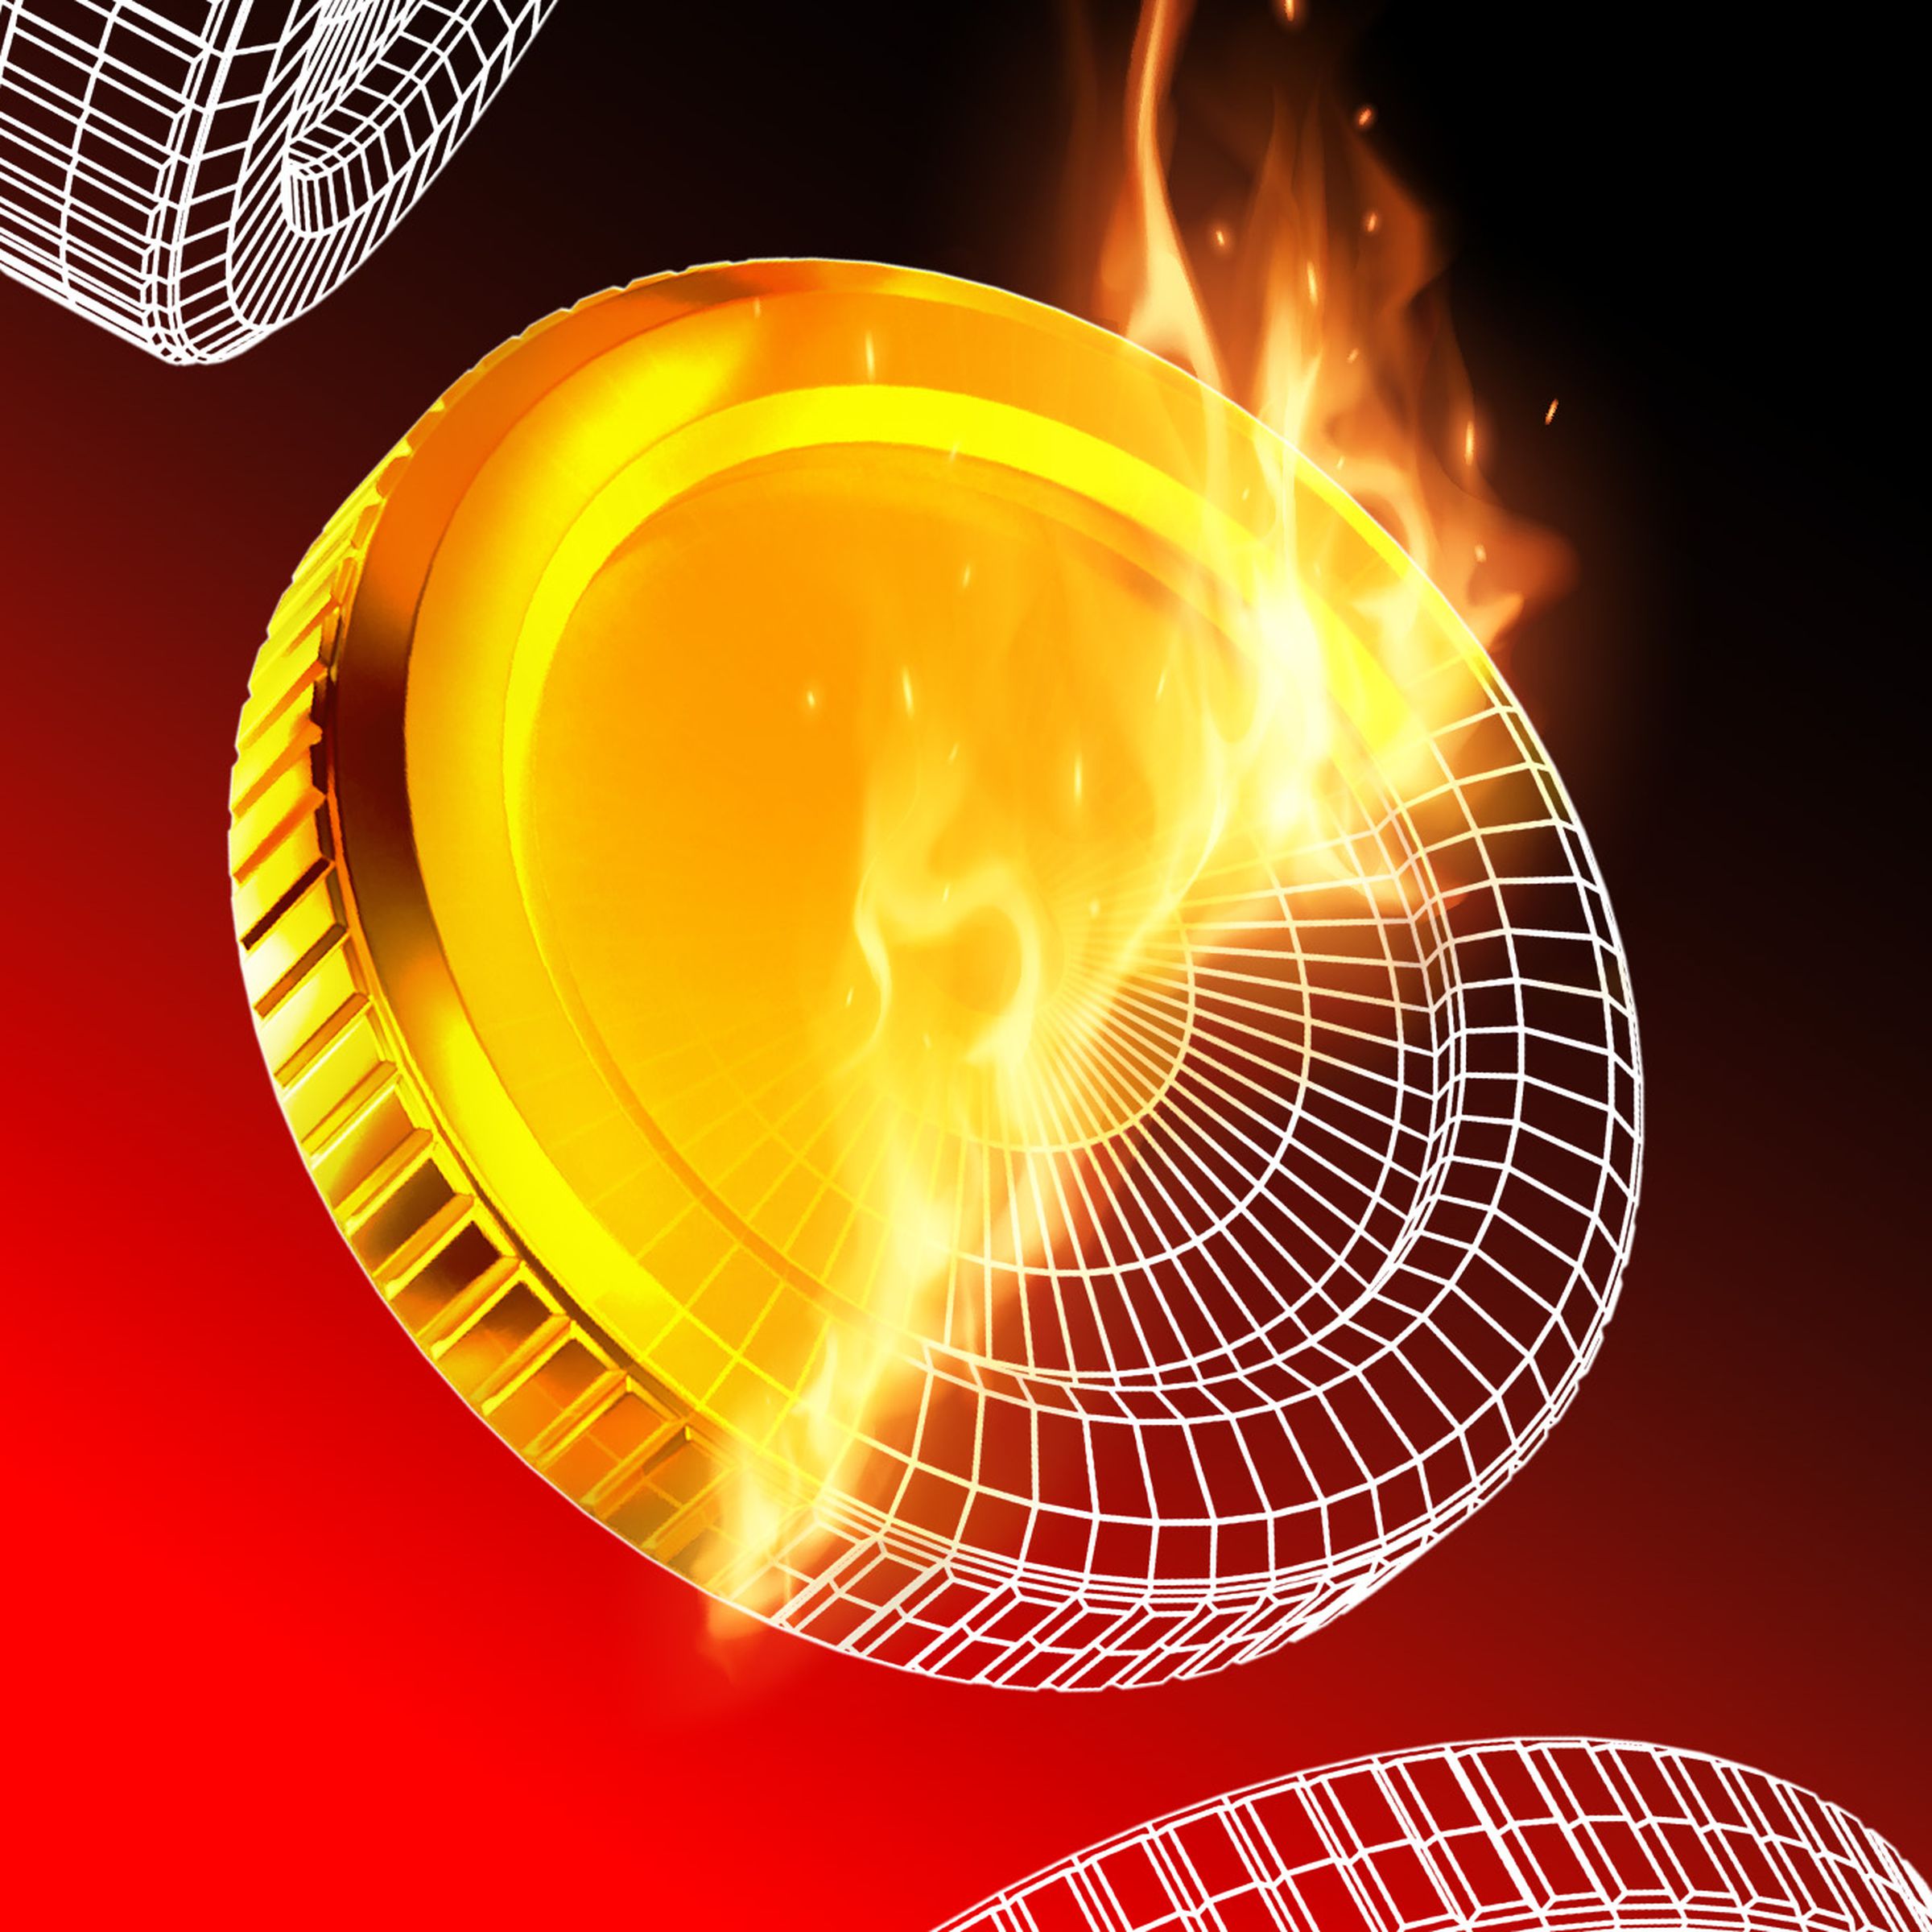 A coin is set aflame to reveal a digital wireframe underneath.